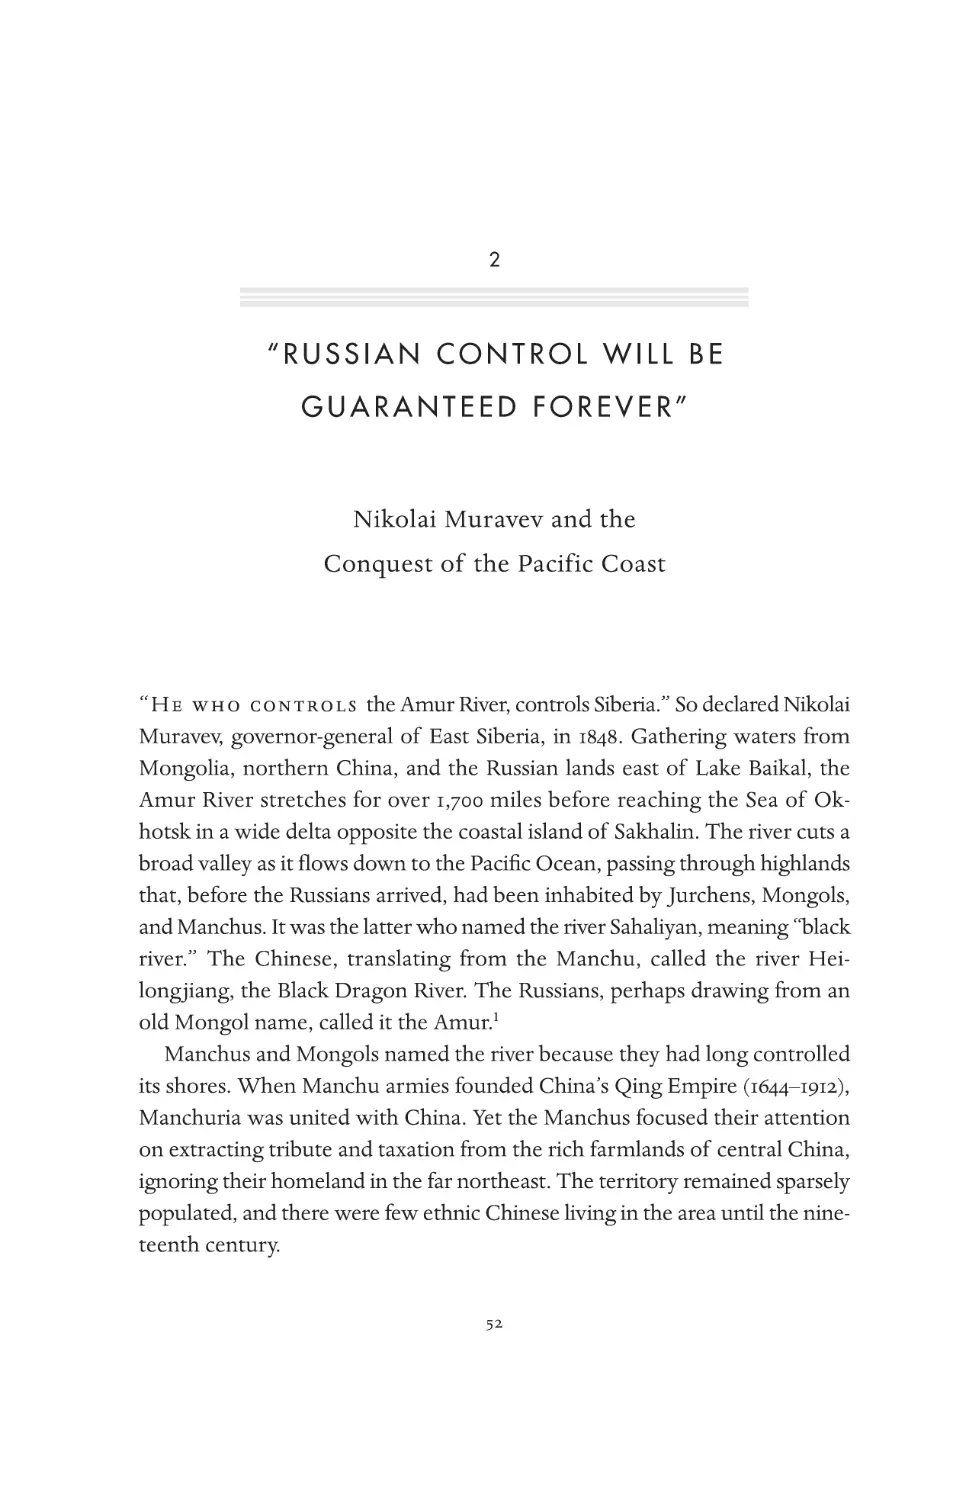 2 “Russian Control Will Be Guaranteed Forever”